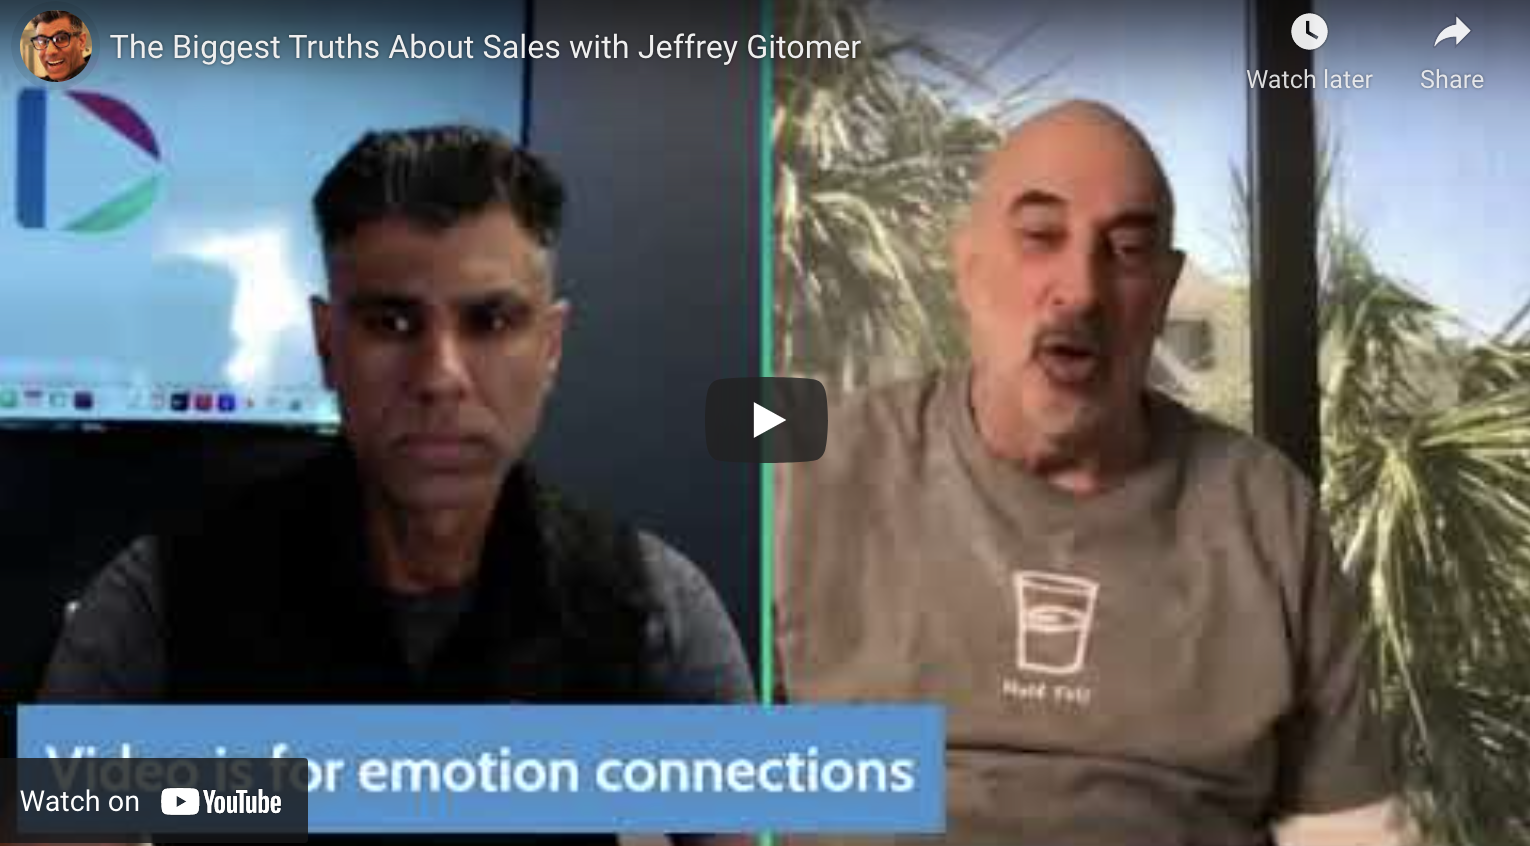 The Biggest Truths About Sales with Jeffrey Gitomer